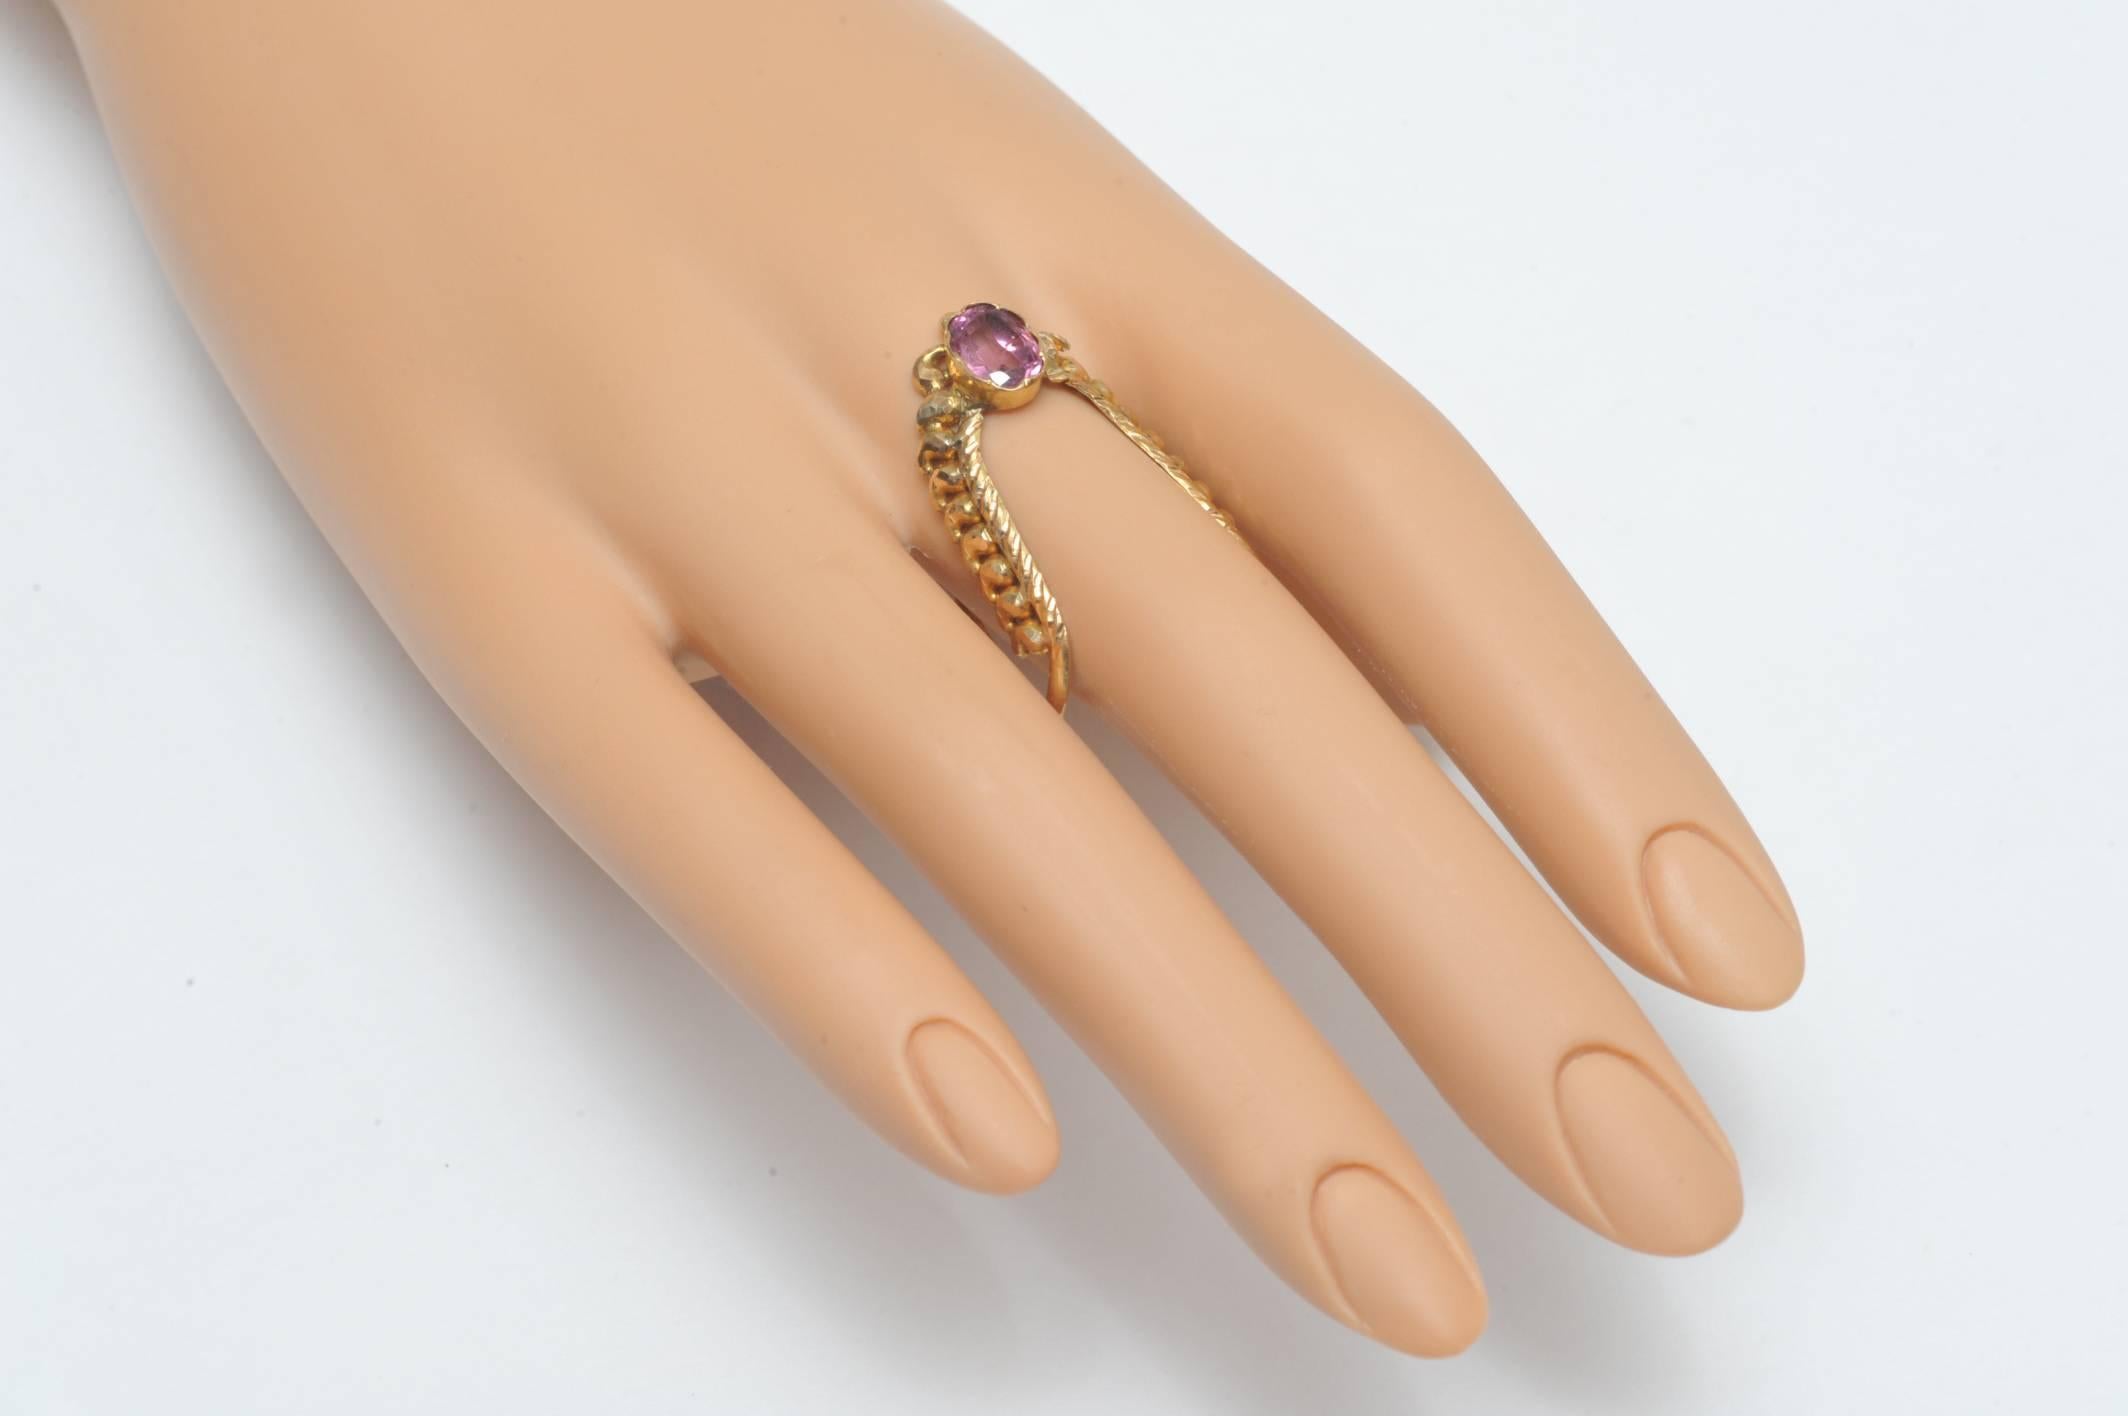 A very unusually-shaped ring with intricate 18K gold work and a faceted oval pink tourmaline.  The design allows for some size flexibility and looks great as a thumb ring as well.  Size as is would be 7.75 at the largest part. Tourmaline is 1 carat.